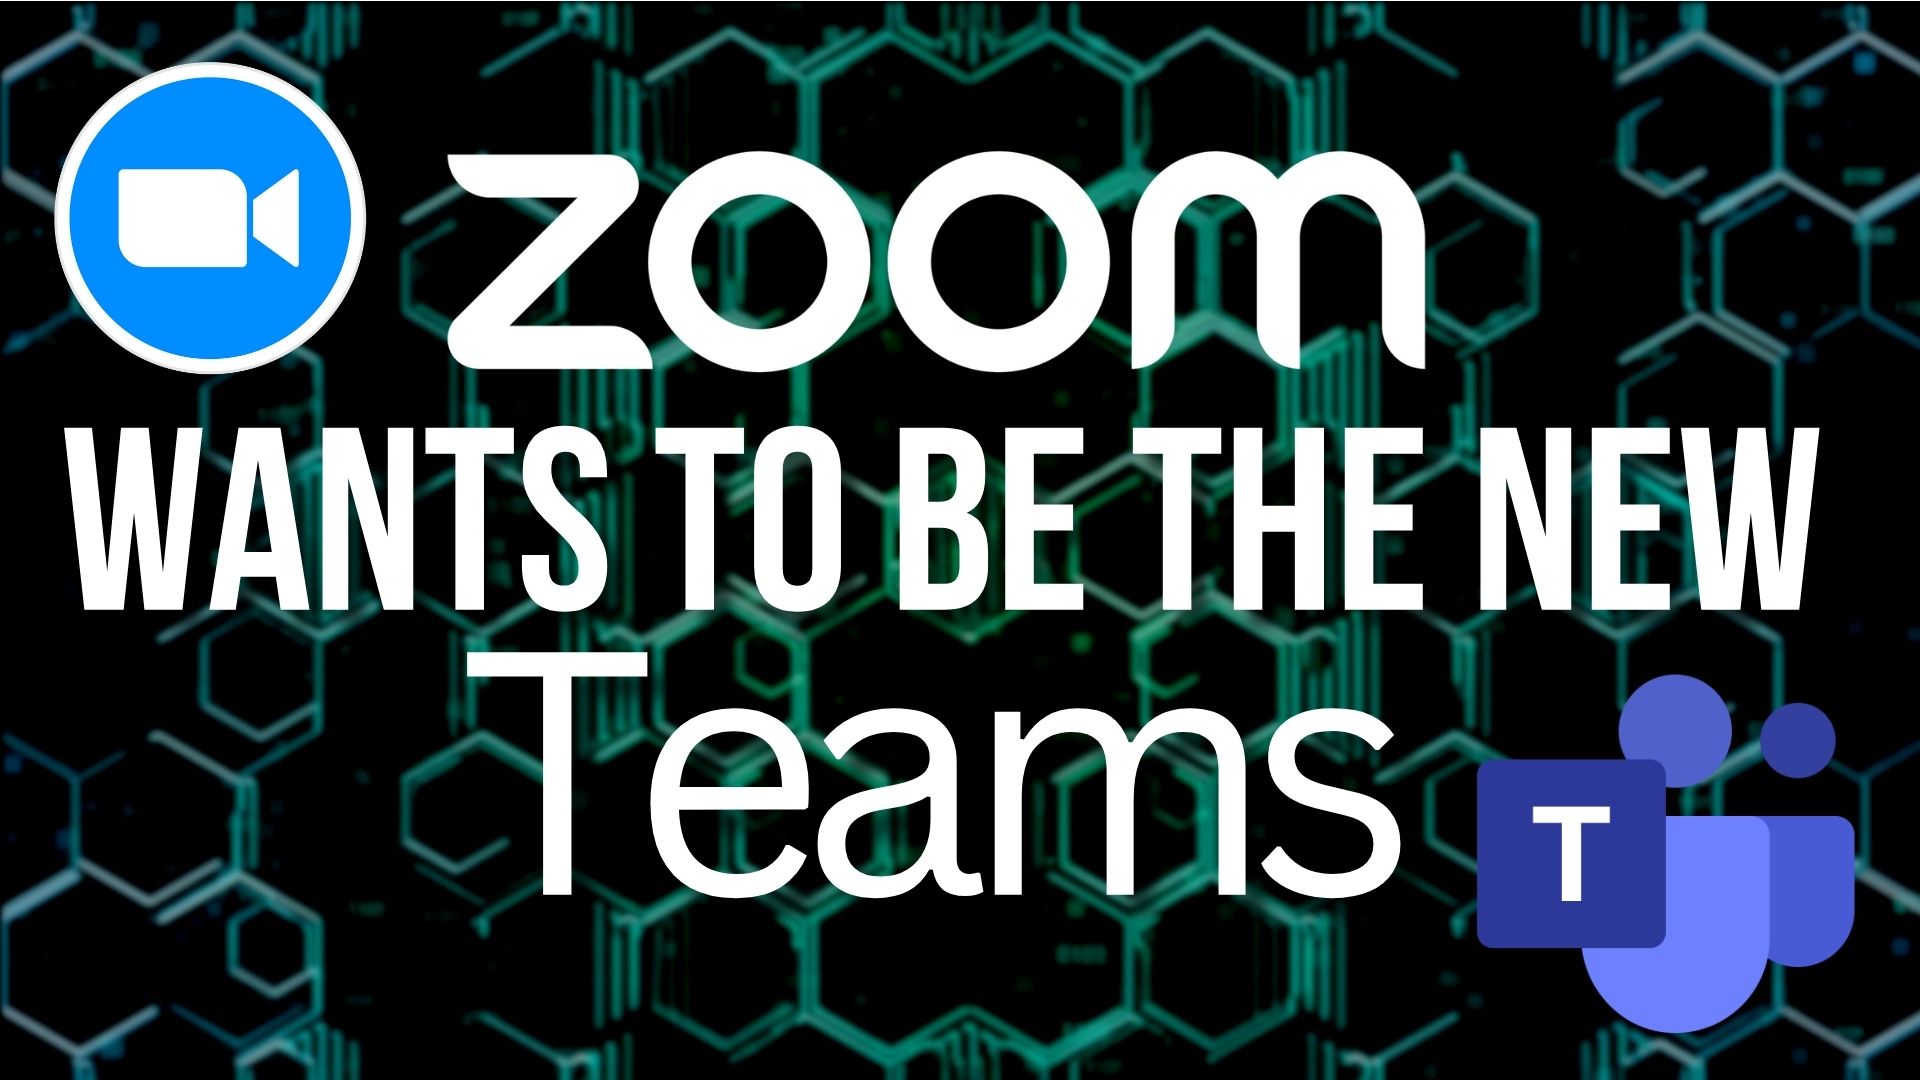 Zoom wants to be the new teams